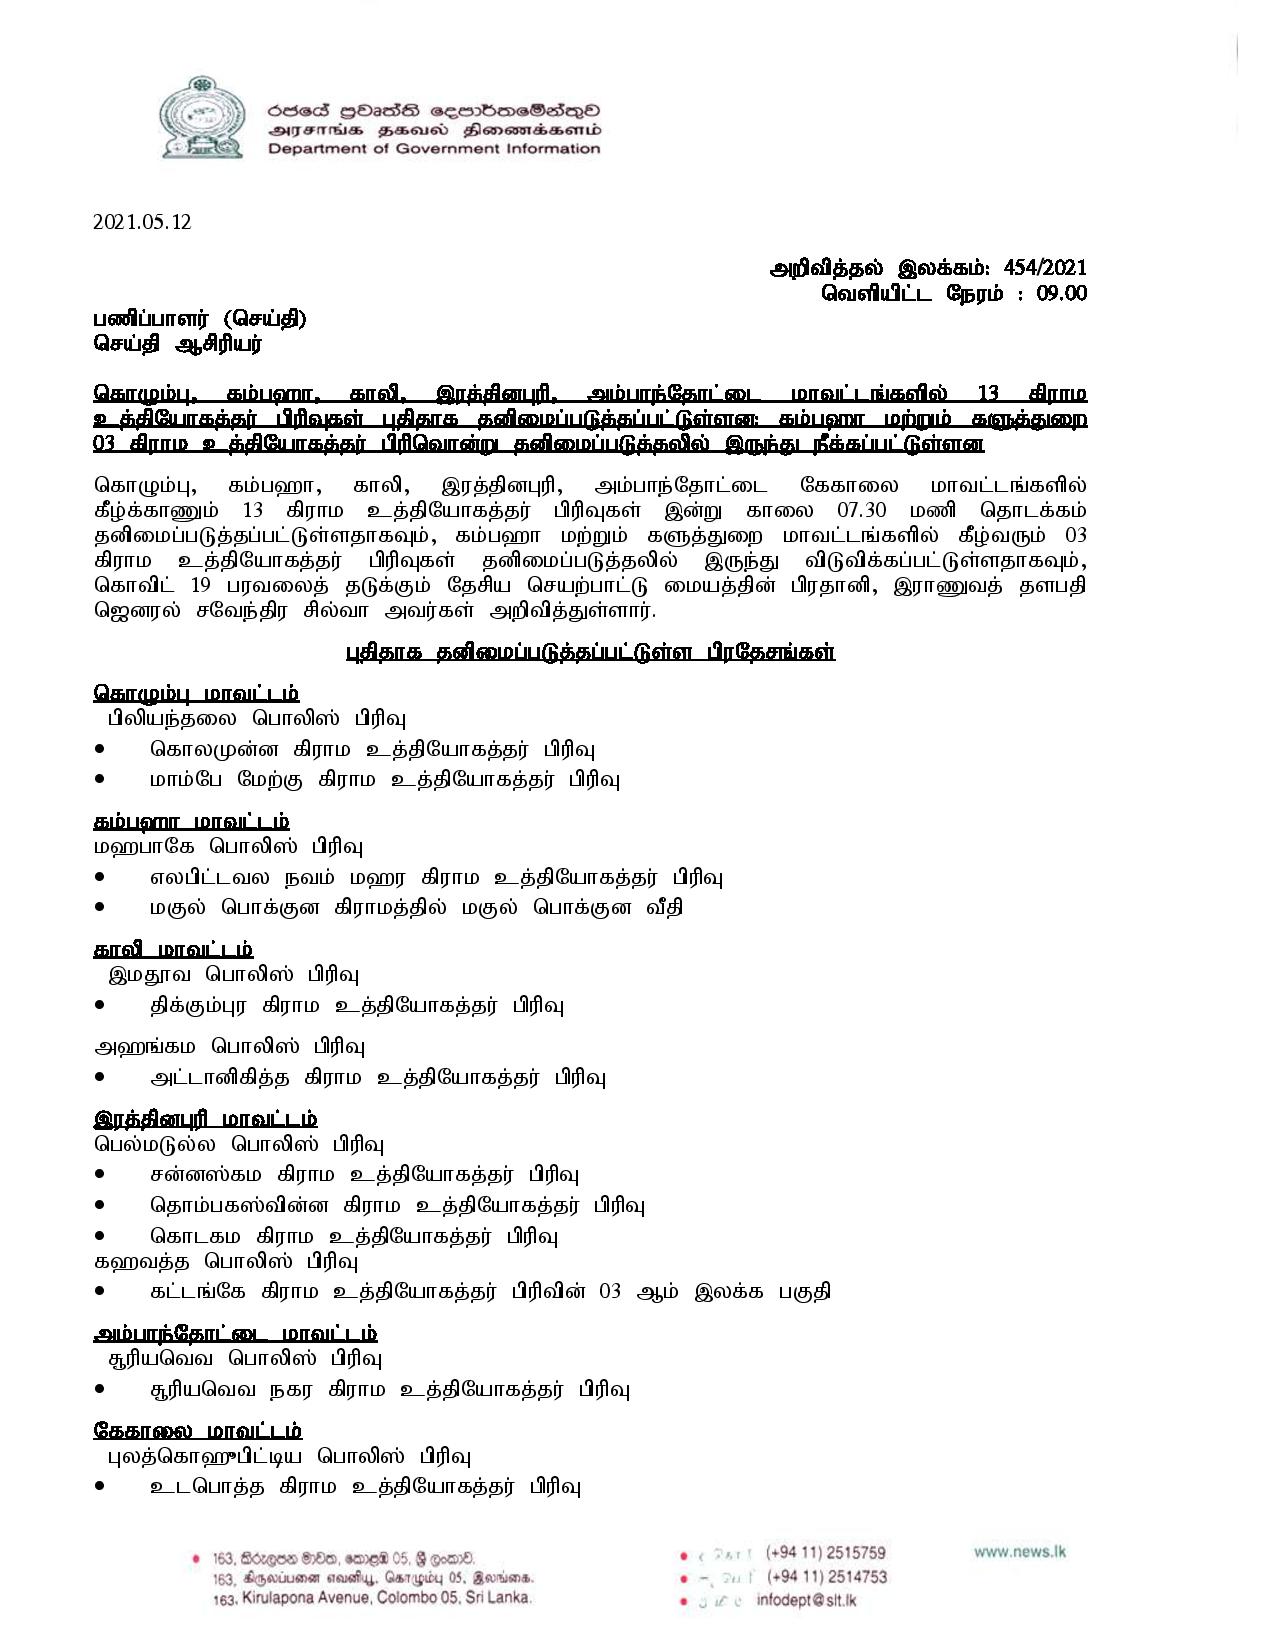 Release No 454 Tamil page 001